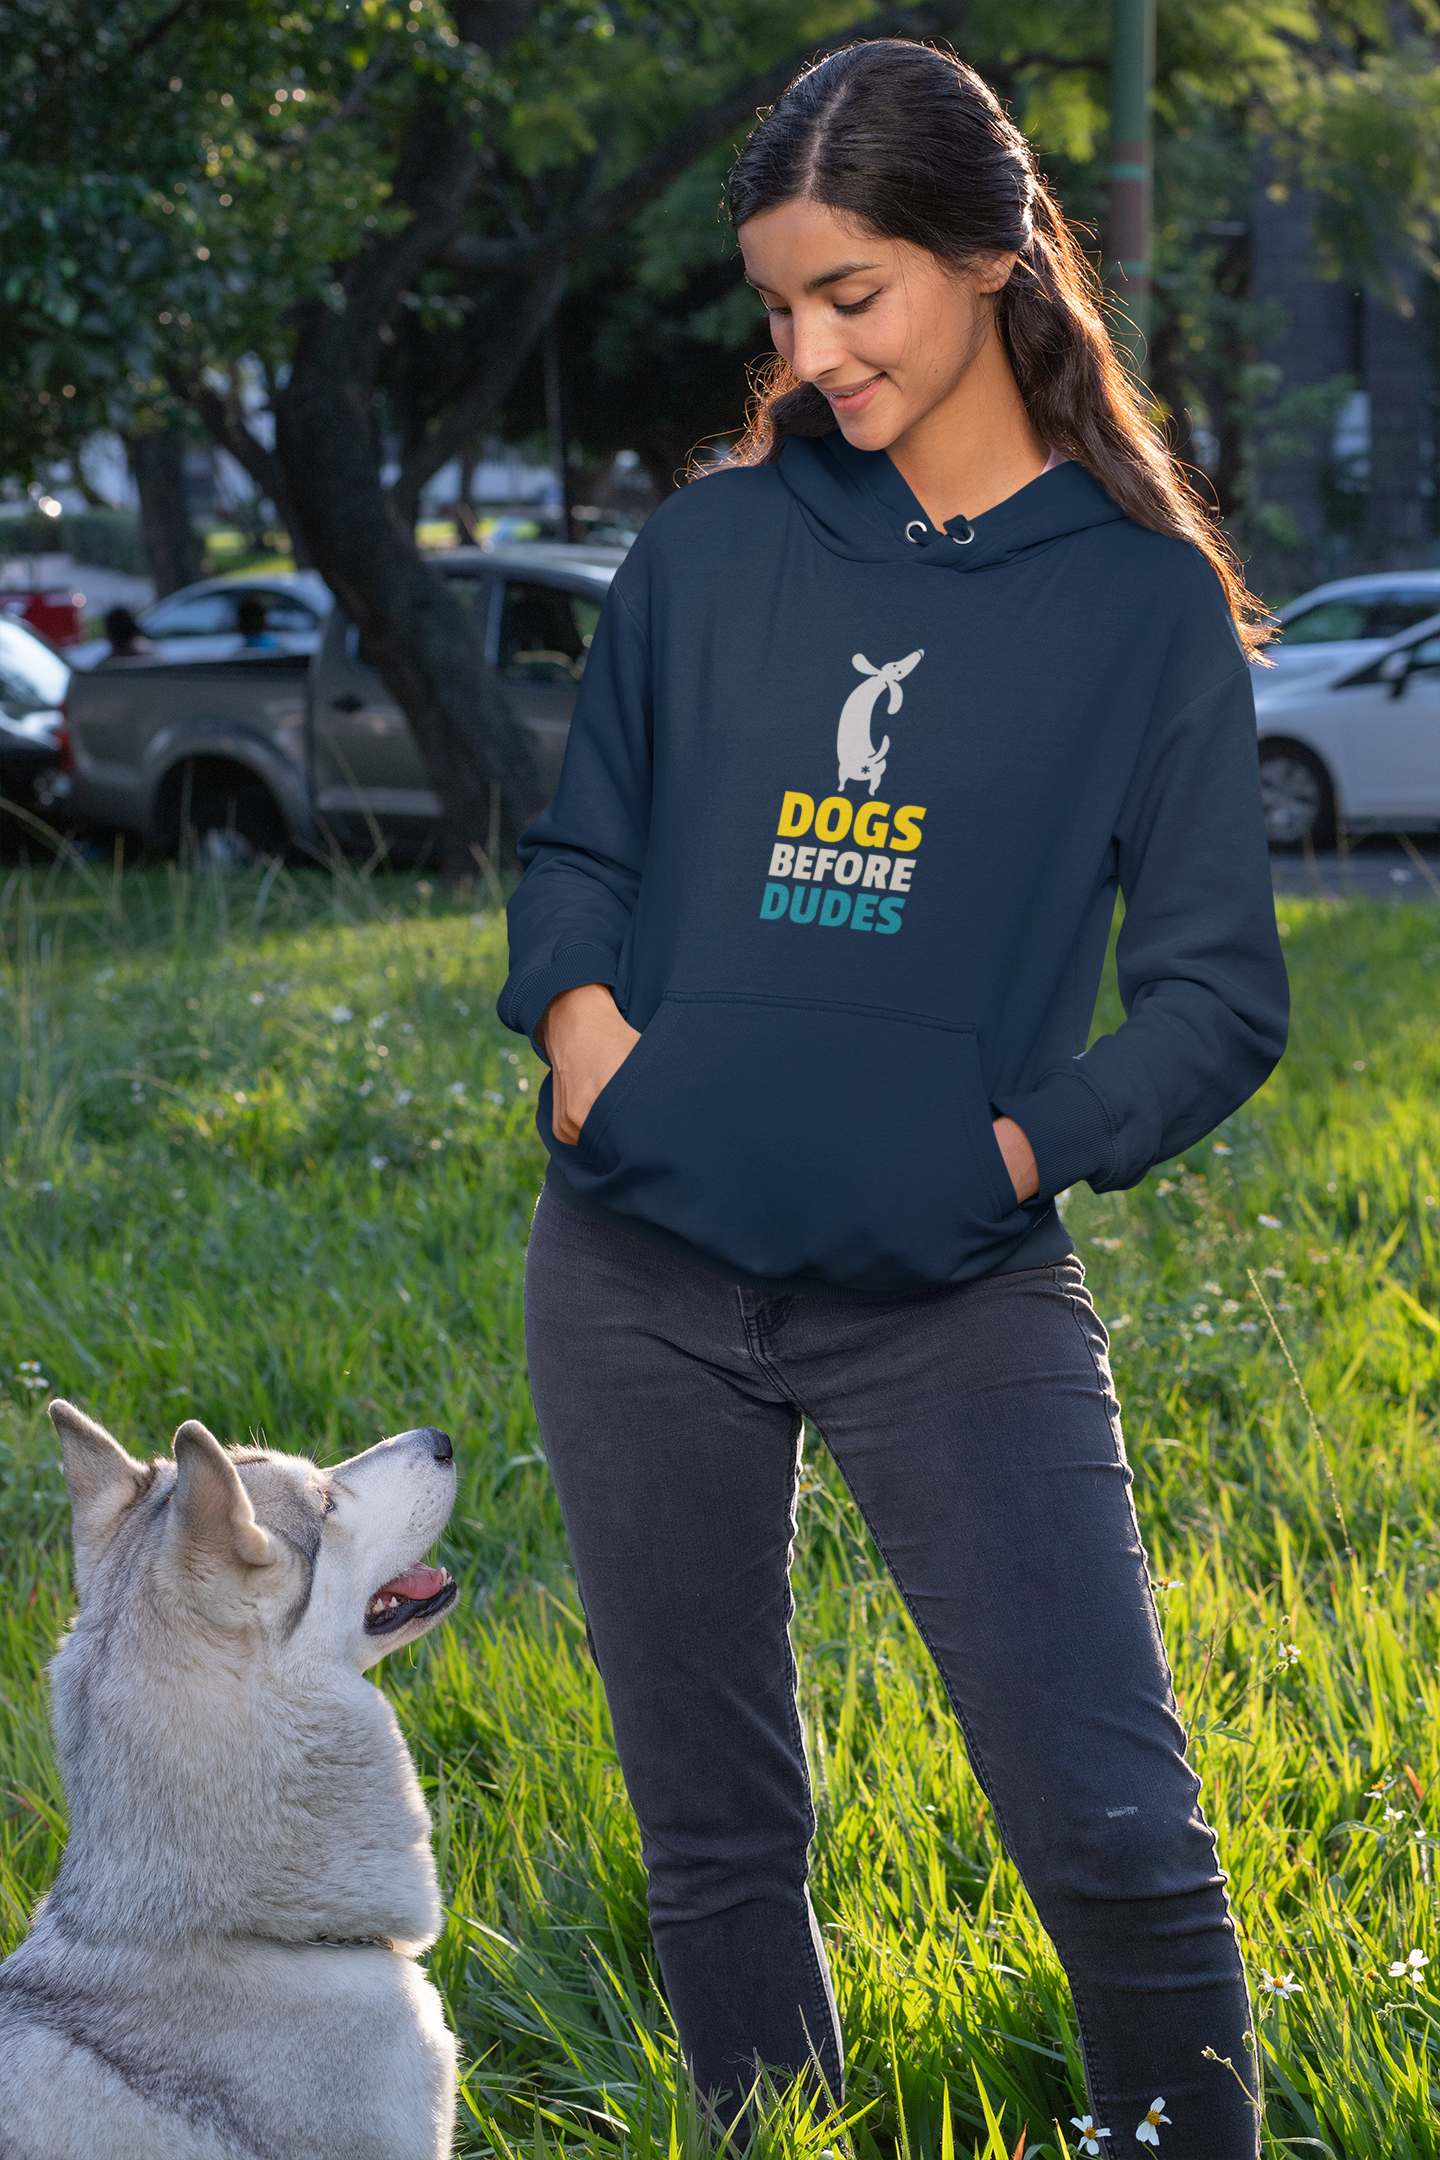 "DOGS BEFORE DUDES "- WINTER HOODIES NAVY BLUE